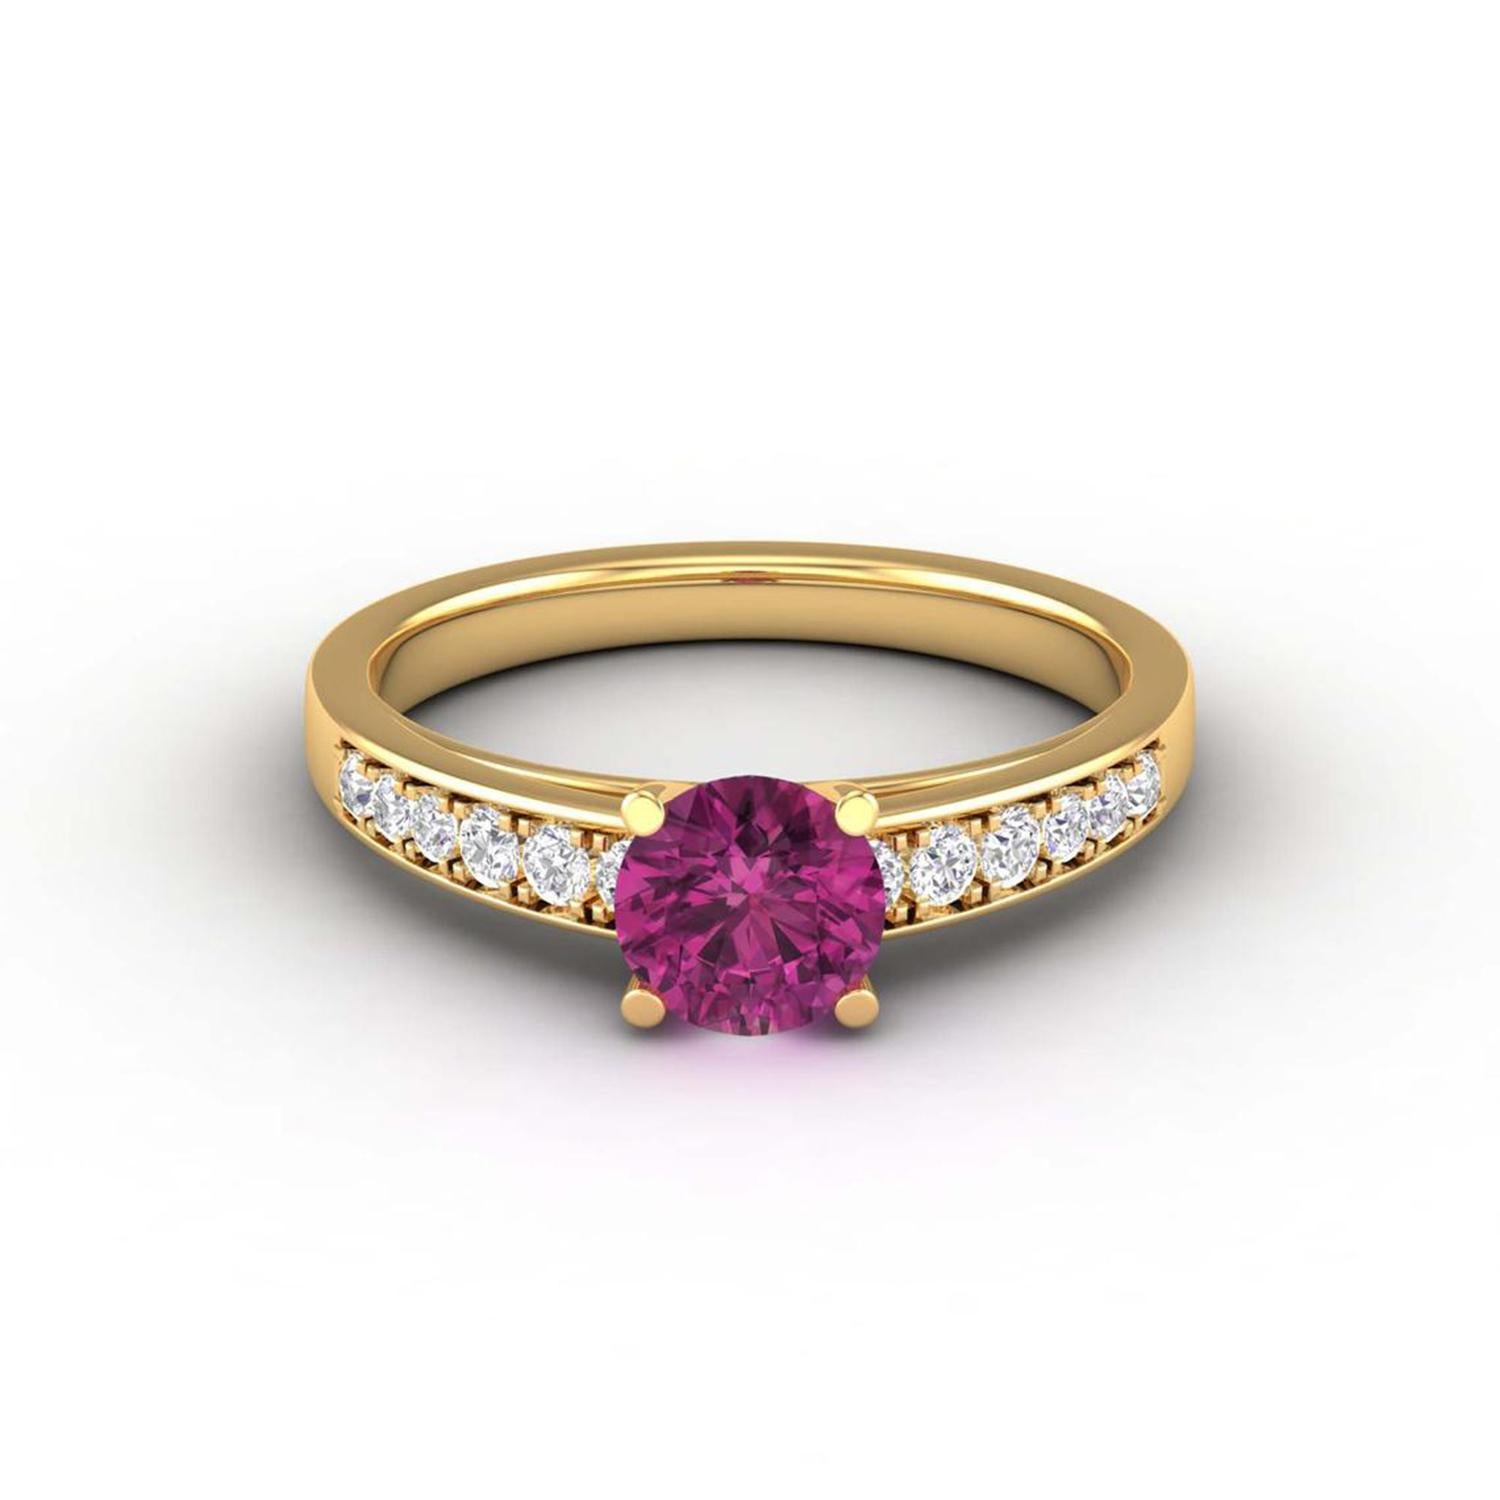 14 K Gold Rubellite Tourmaline Ring / Round Diamond Ring / Solitaire Ring For Sale 1